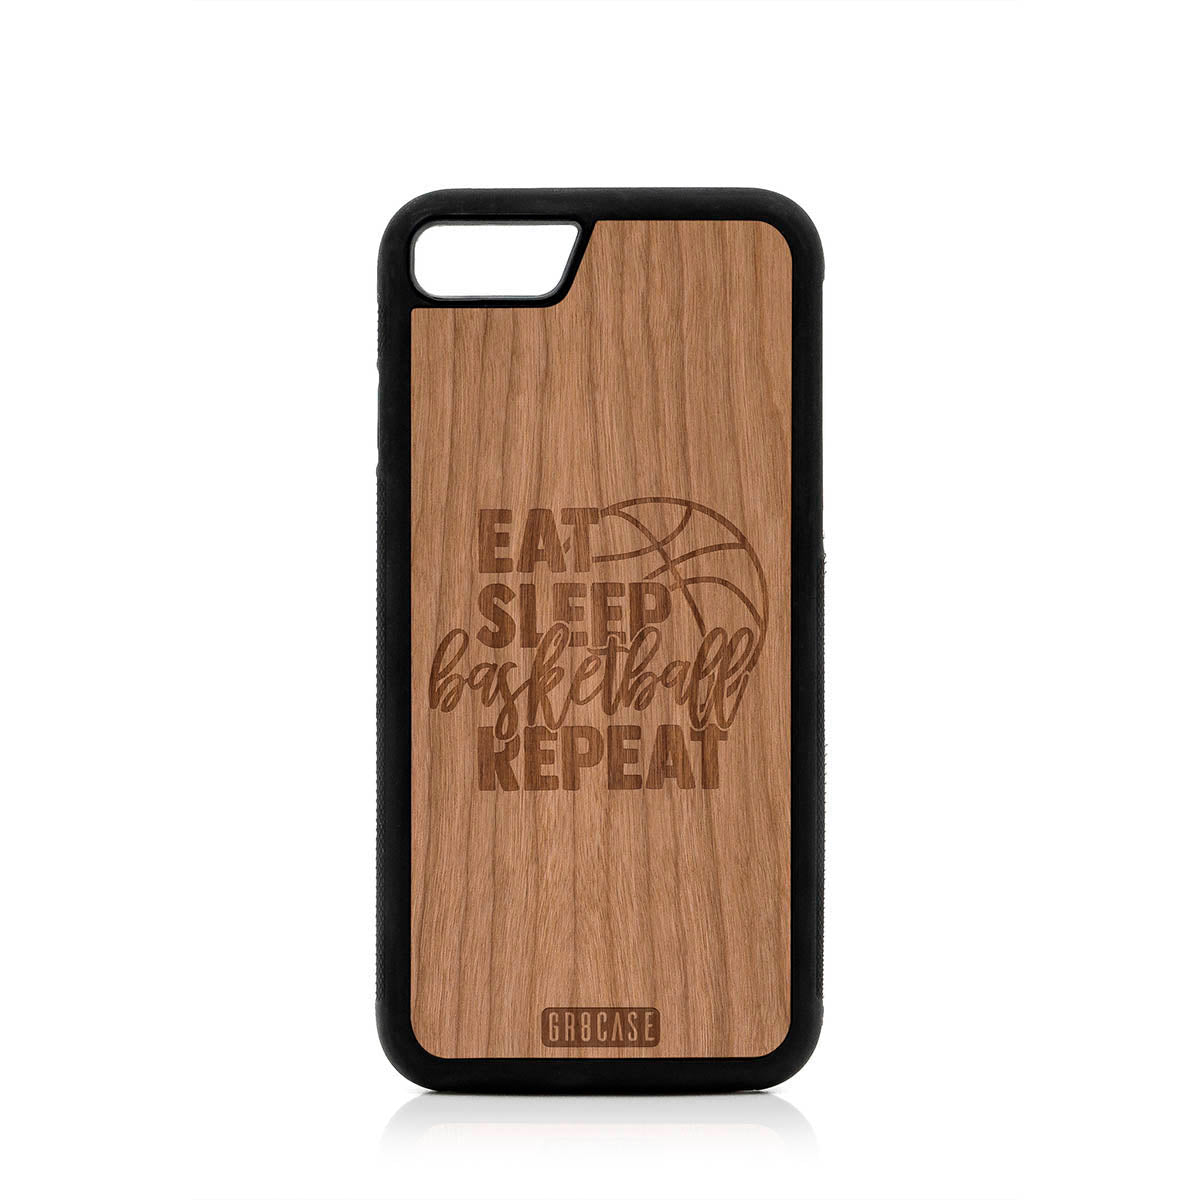 Eat Sleep Basketball Repeat Design Wood Case For iPhone 7/8